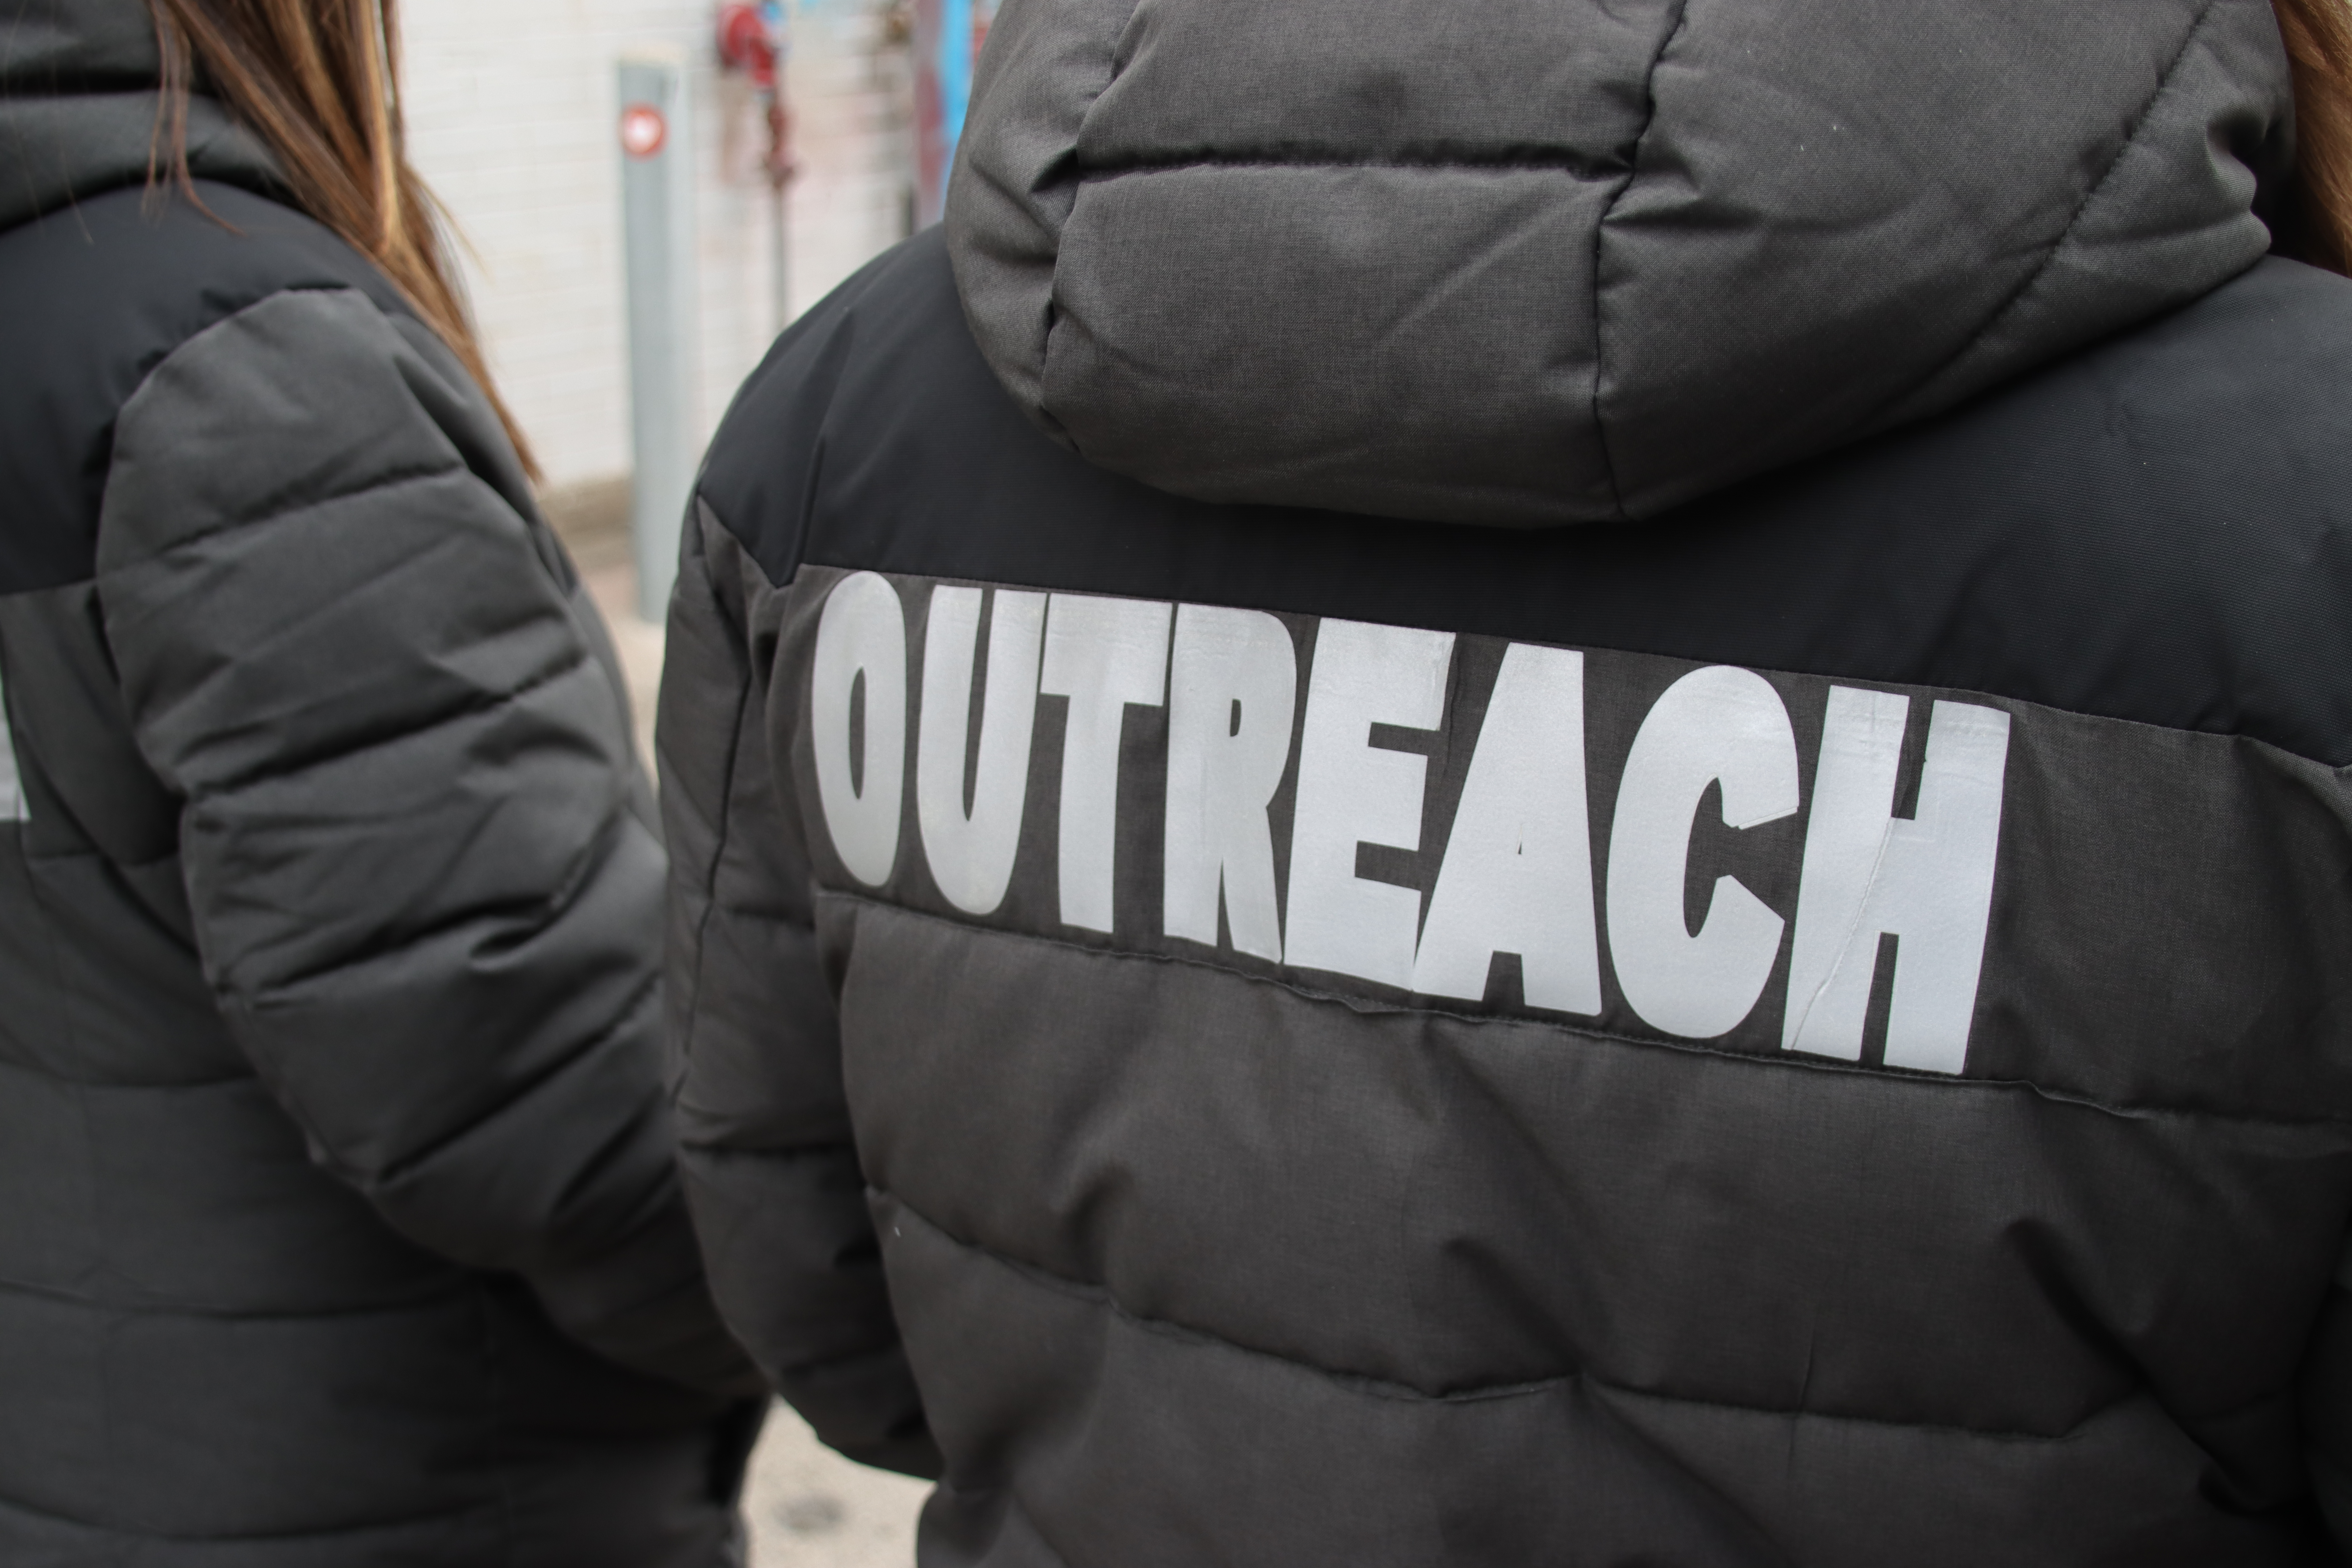 Outreach standing facing the distance in black outreach jackets